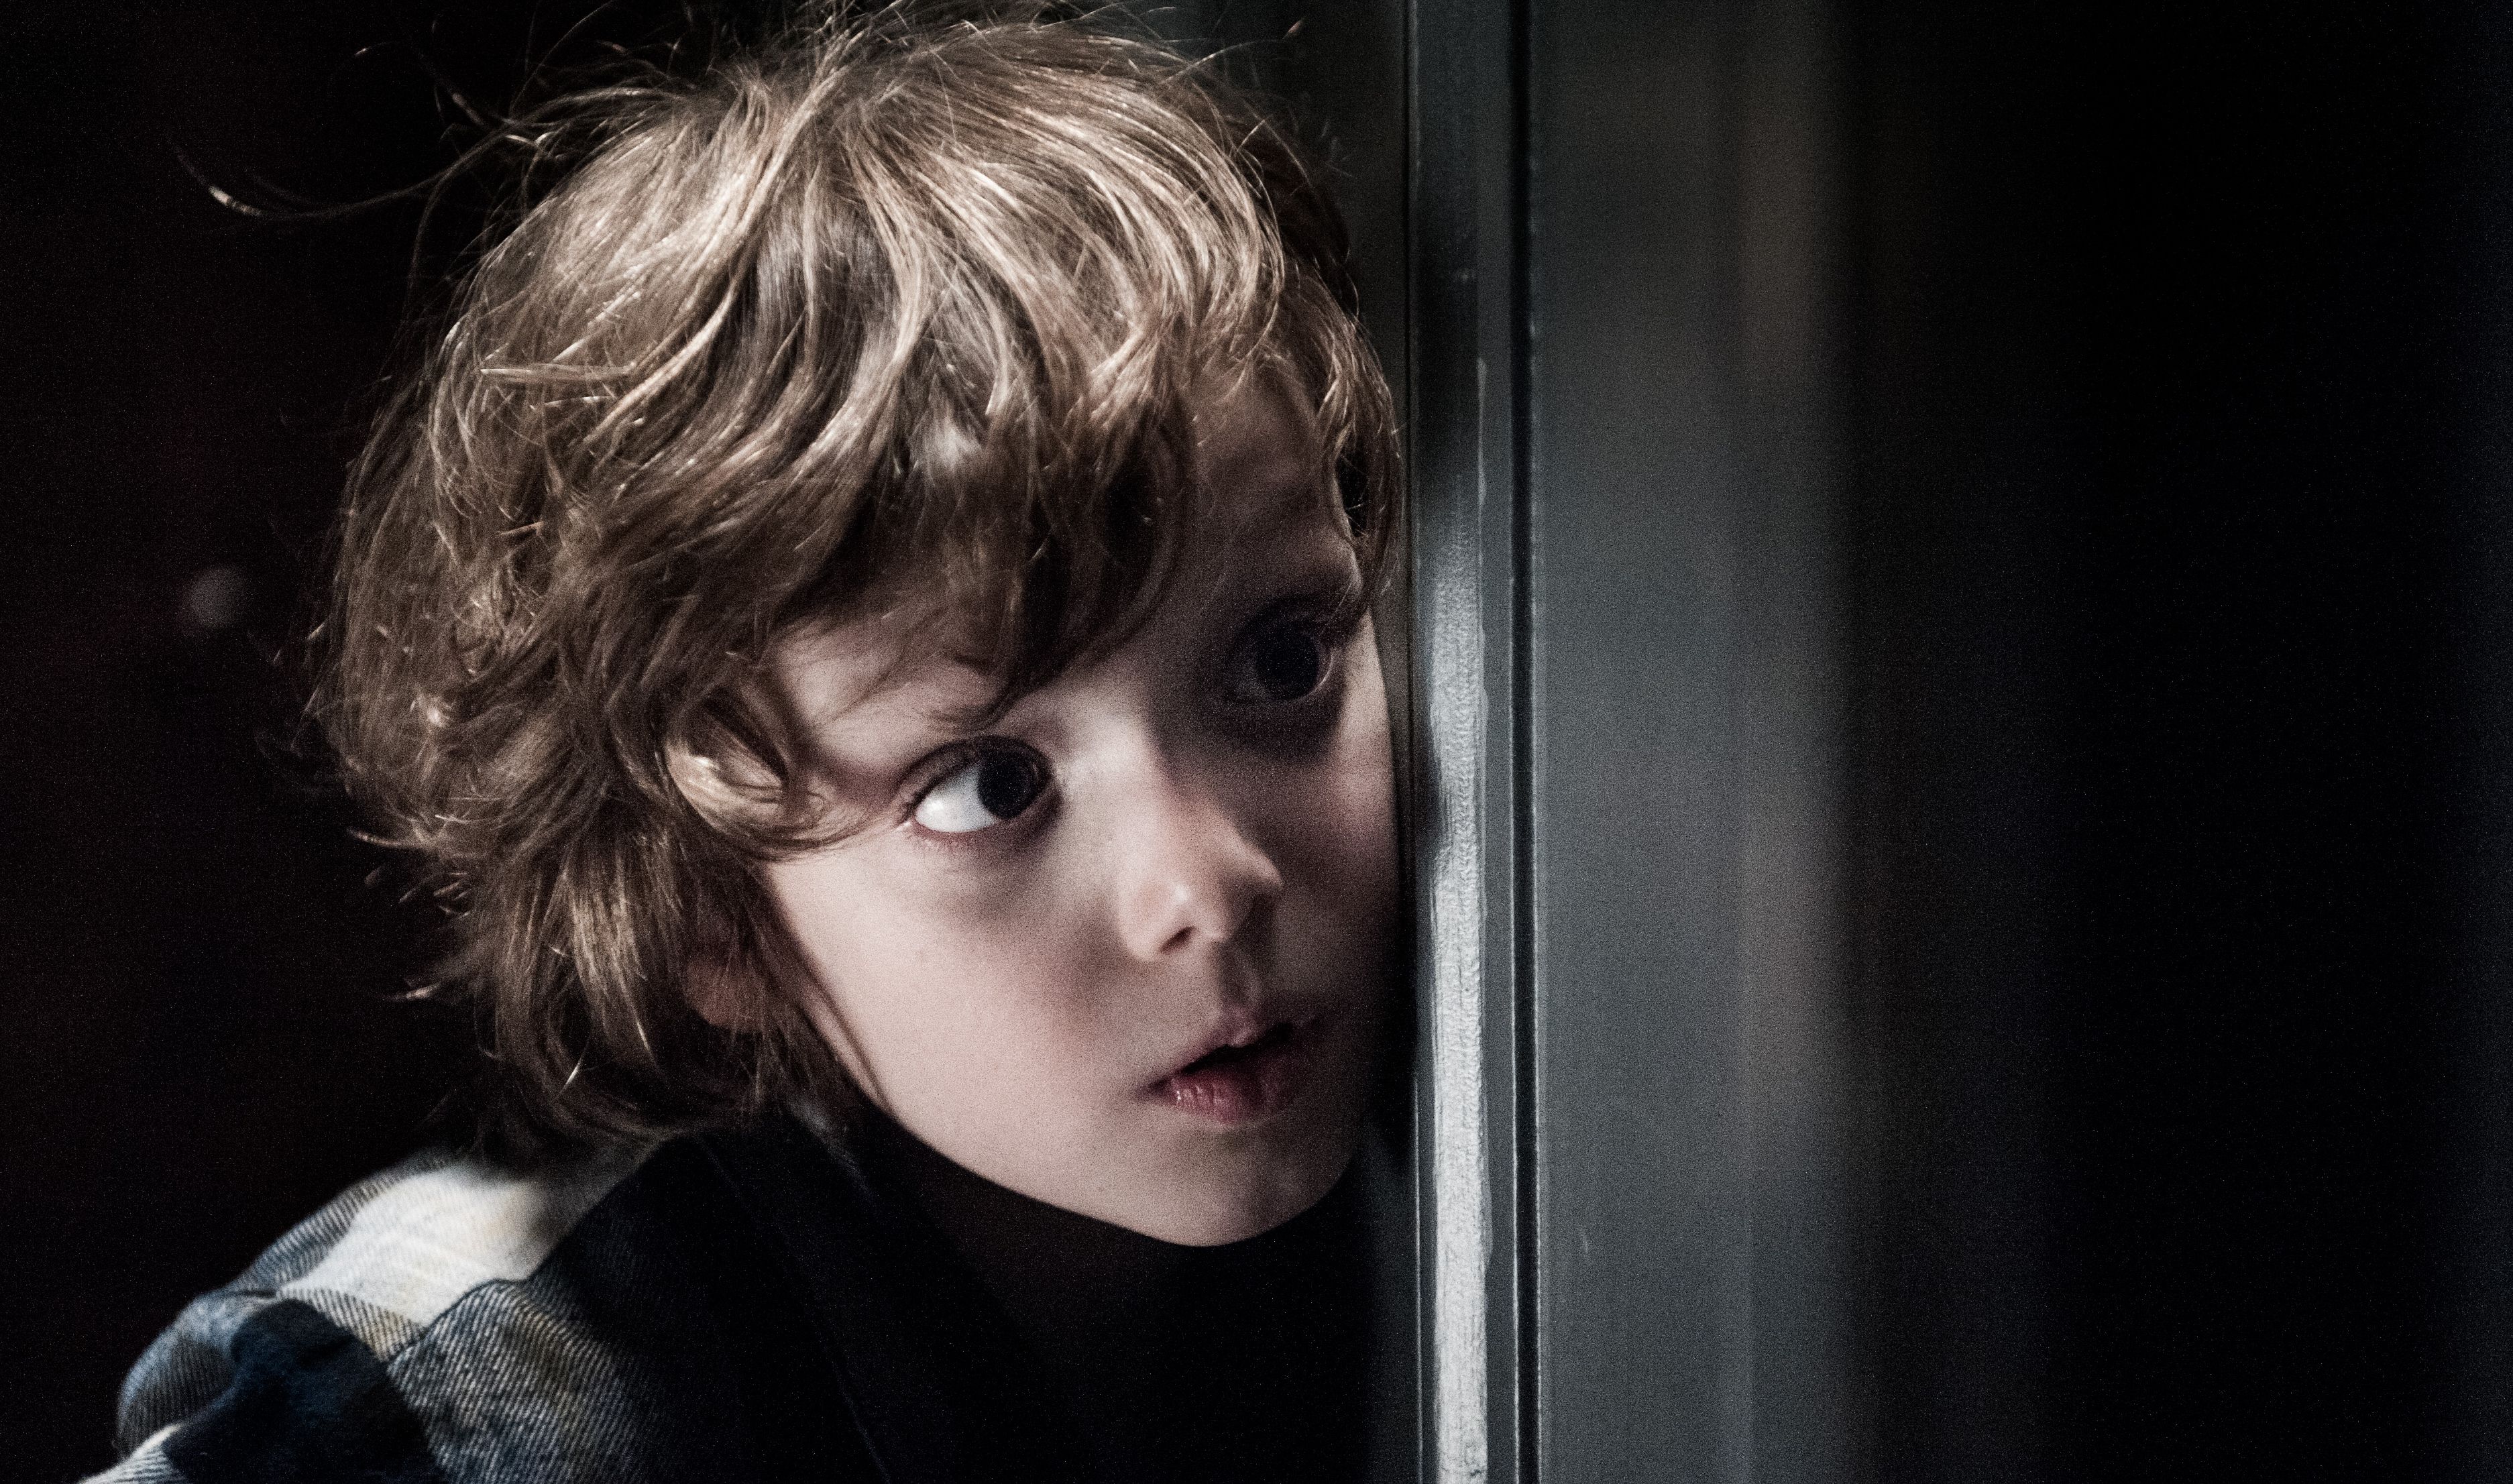 Scared kid in The Babadook